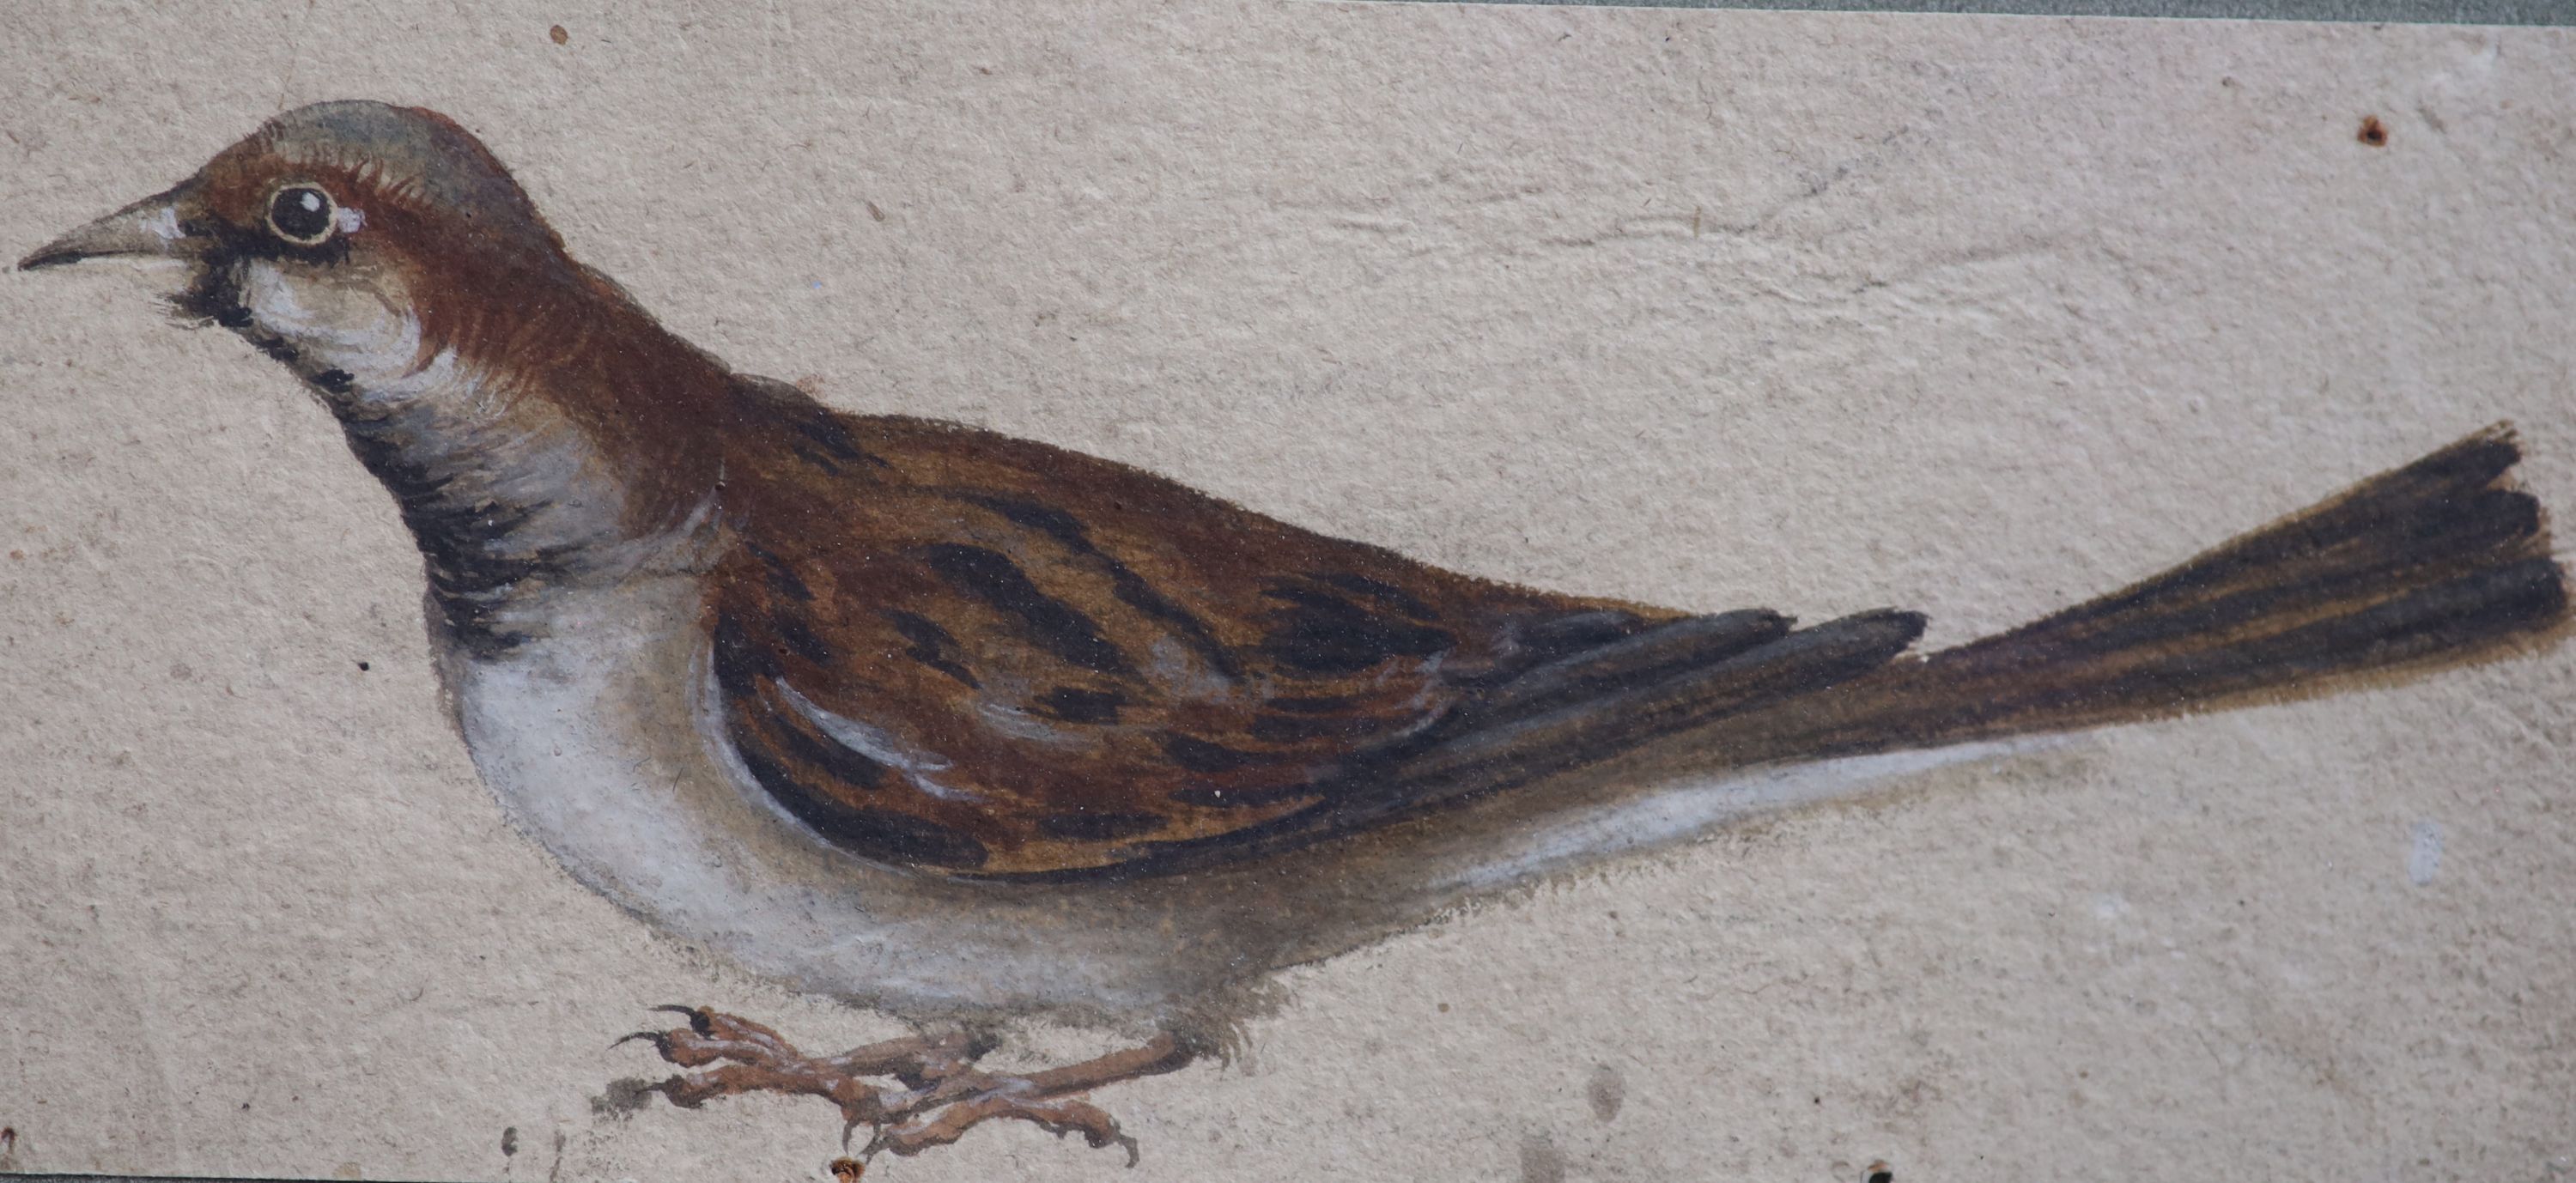 Early 17th century French School , Two bird studies, one title Pouillon, bodycolour on paper, 10 x 15.5cm and 8 x 17.5cm